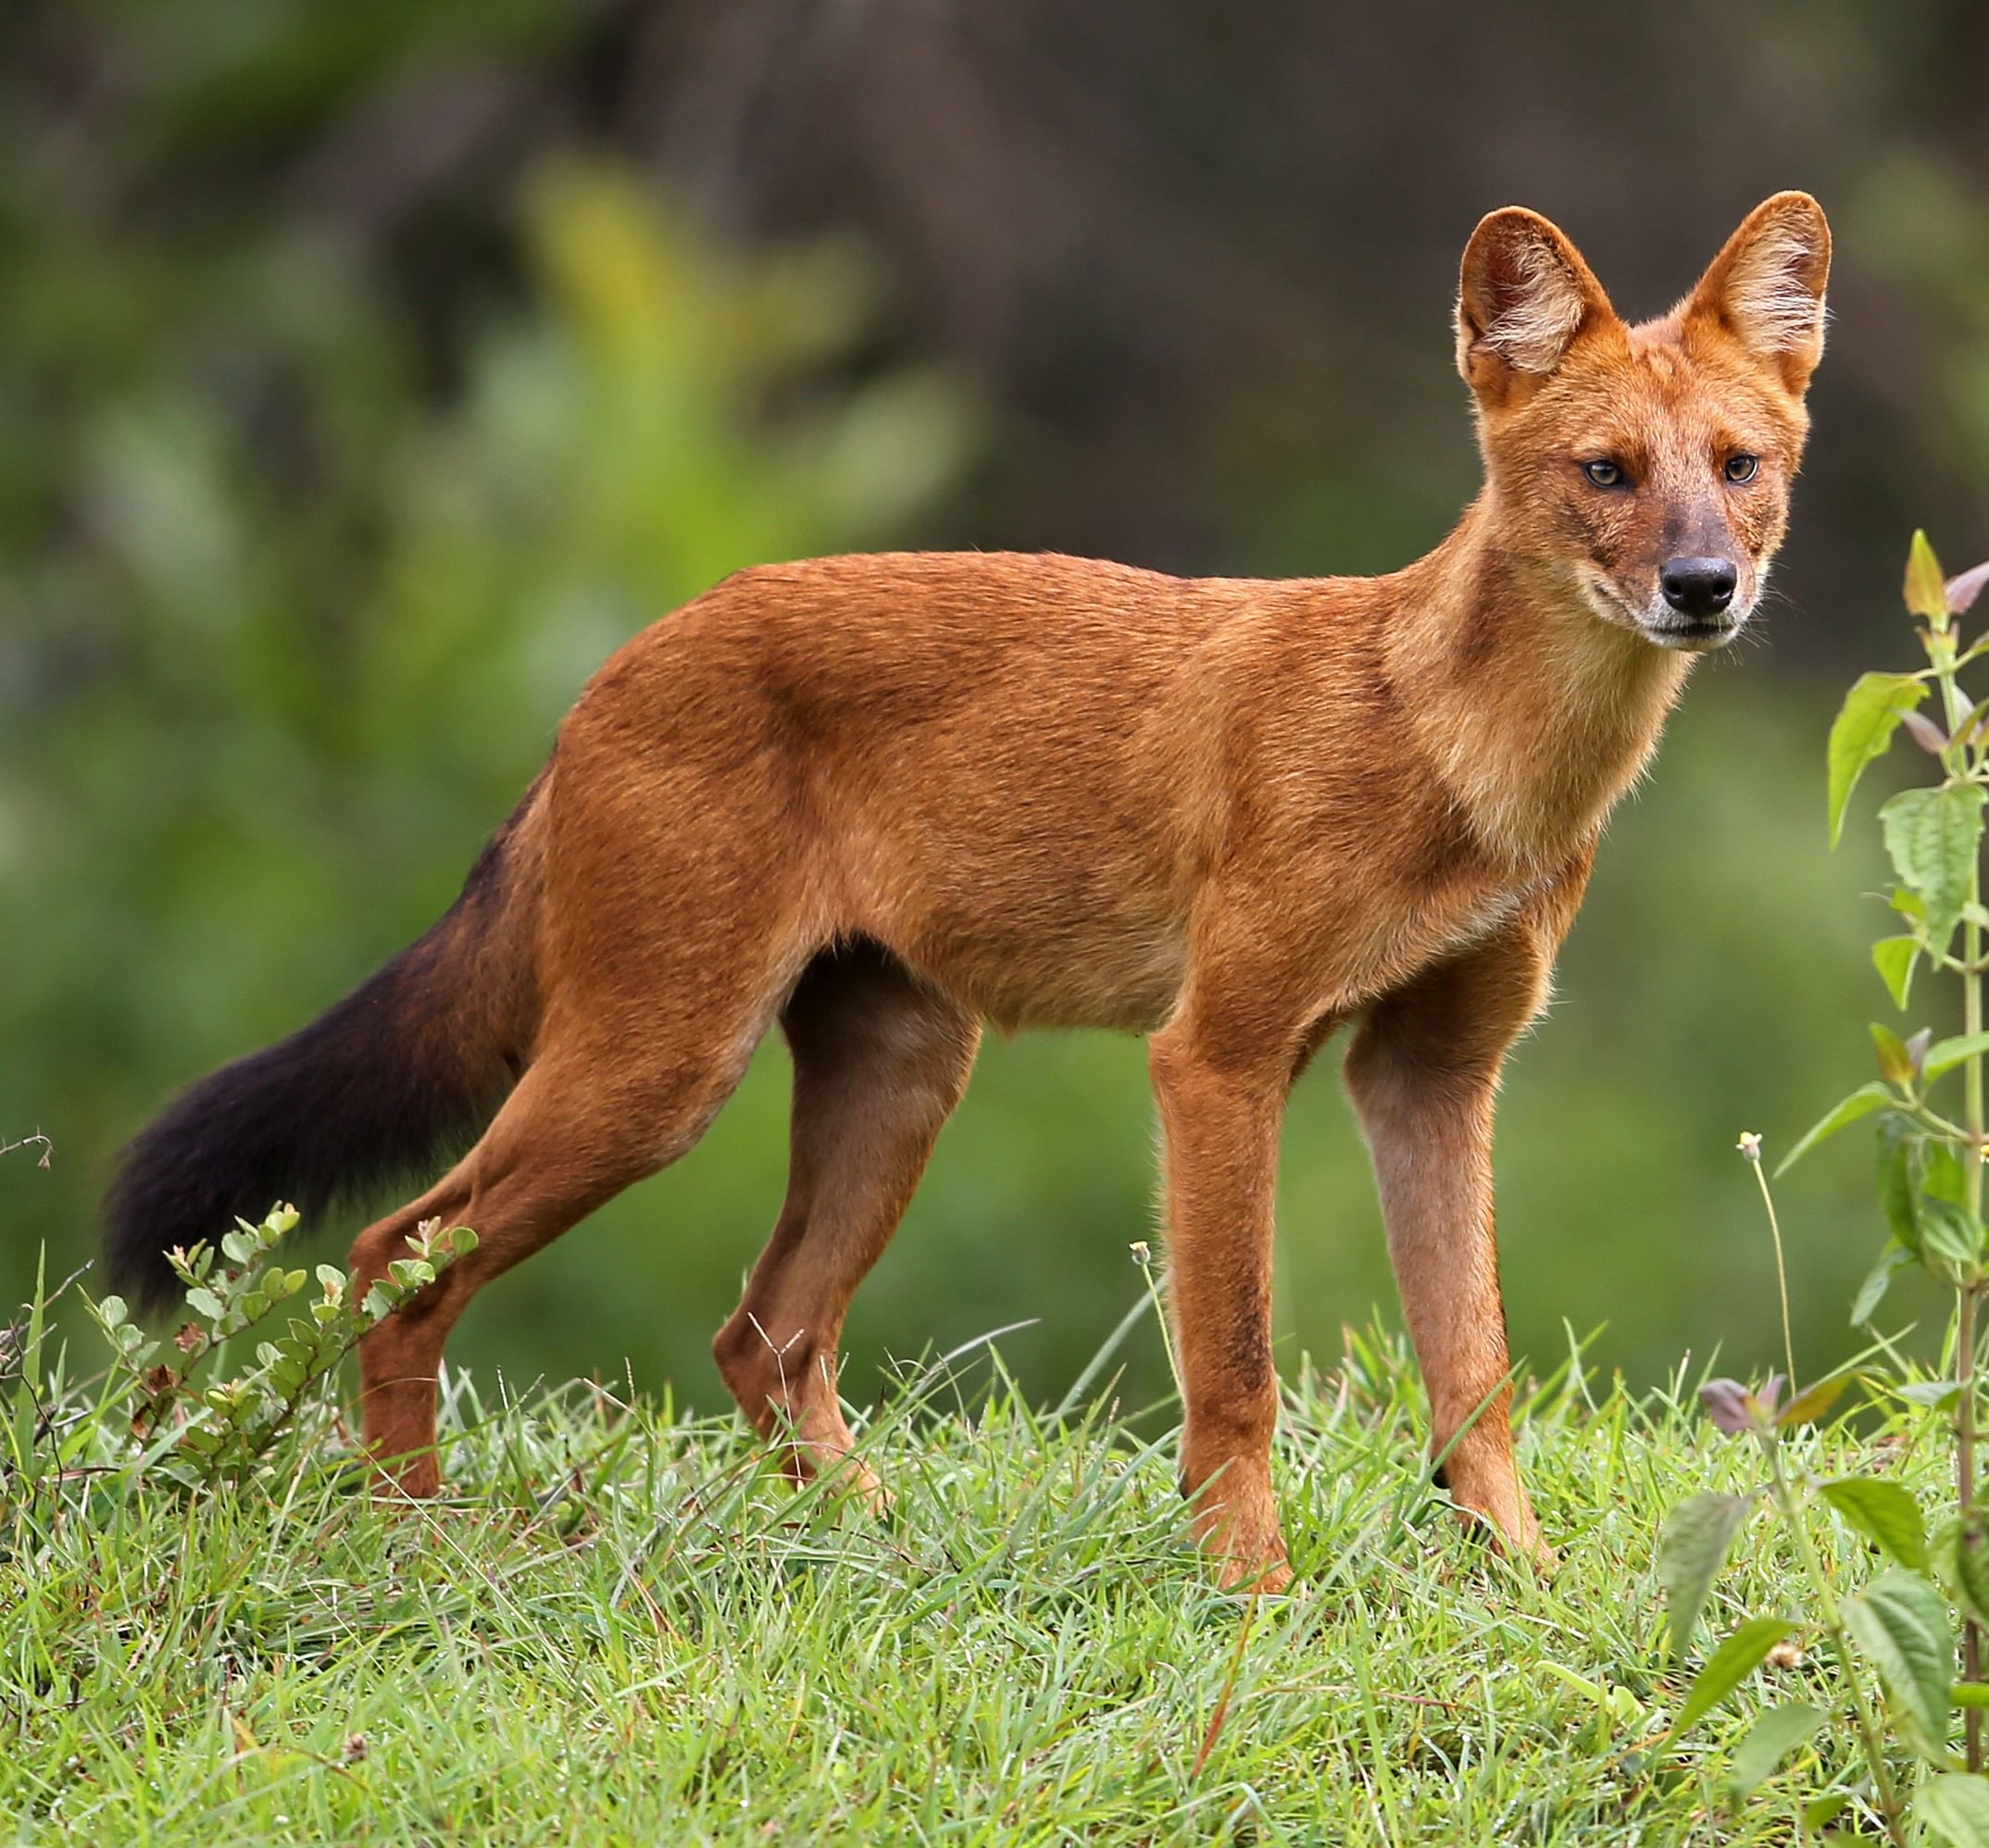 The Indian Wild dog or the dhole bears resemblance to the ordinary village cur, but its ears are more rounded, its coat is rust-coloured, and it has a bushy tail with black tuft. Photo/Wikipedia